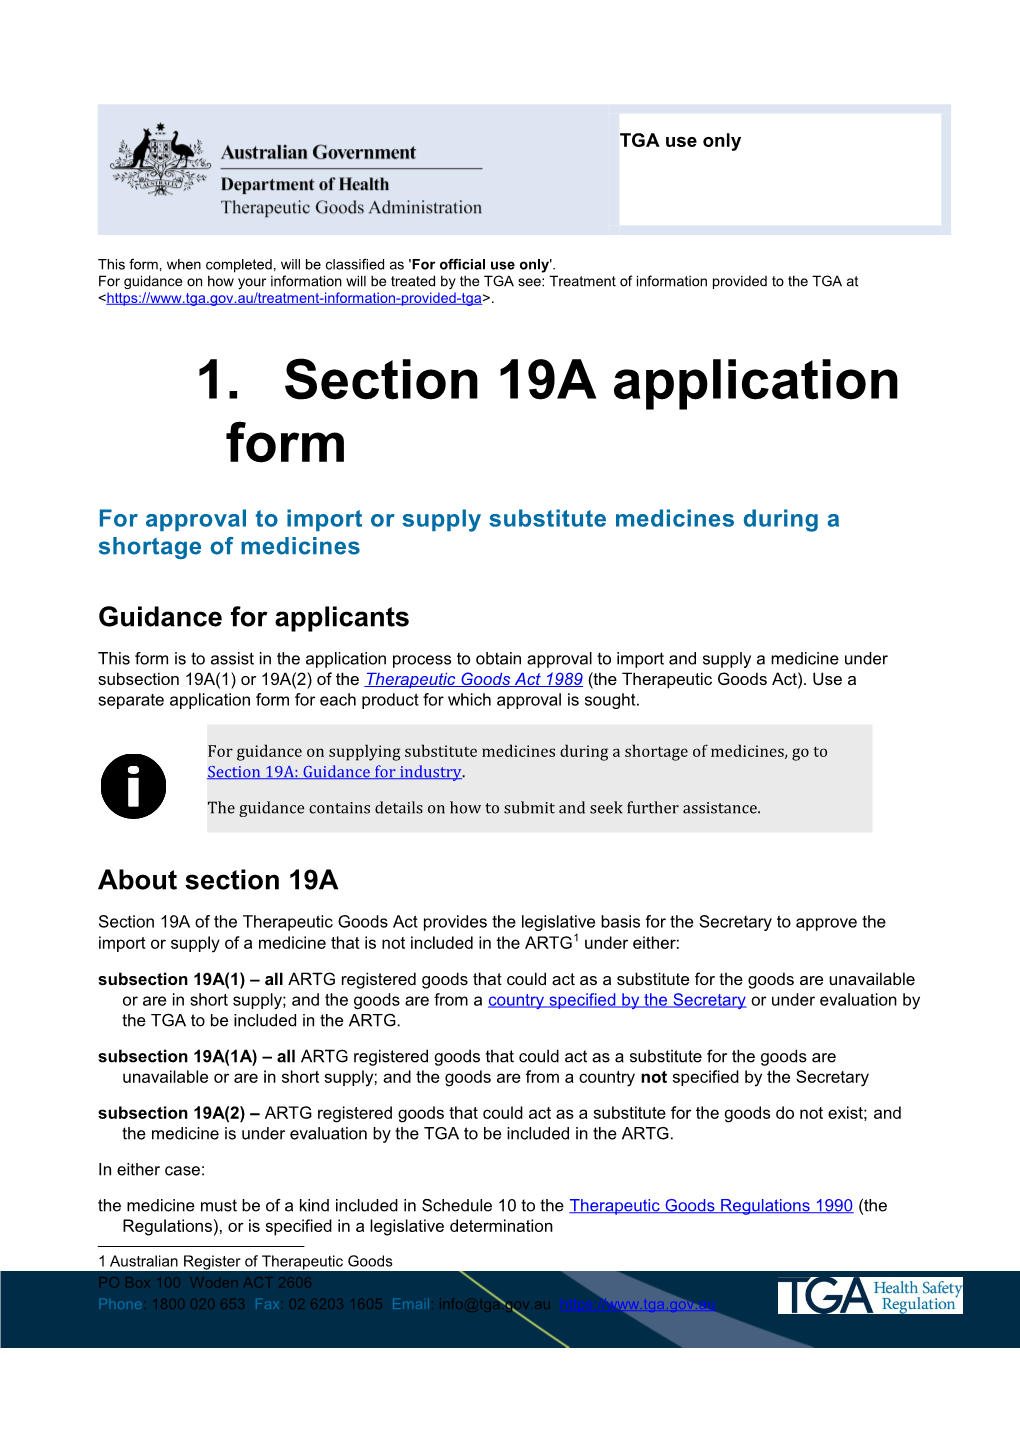 Section 19A Application Form - for Approval to Import Or Supply Substitute Medicines During